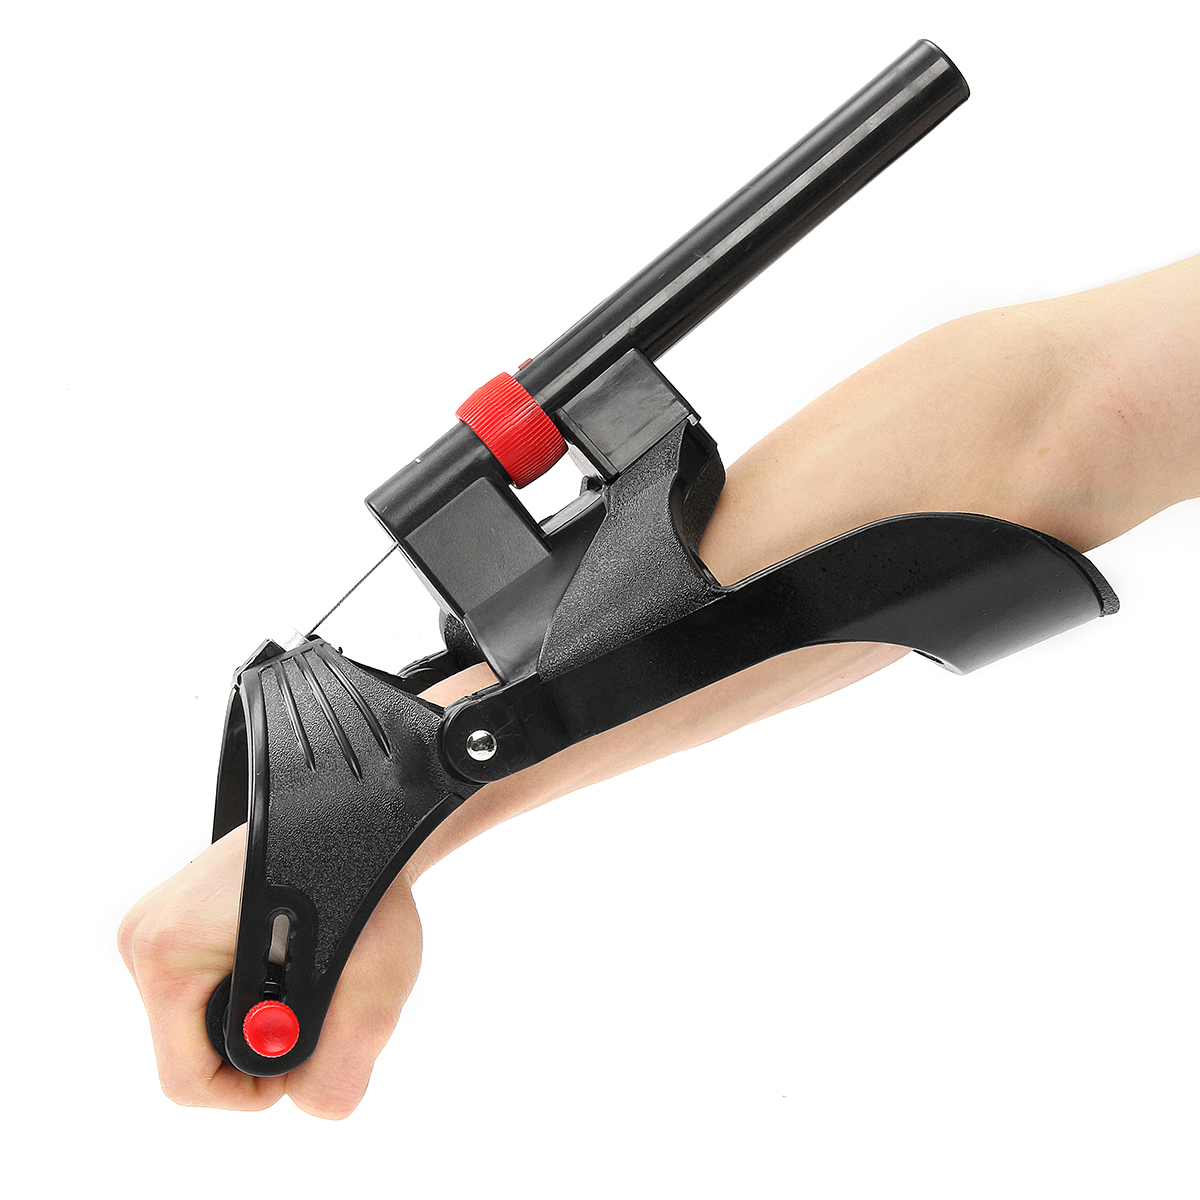 

Forearm Muscle Training Grip Hand Strengthen Adjustable Wrist Exerciser Trainer